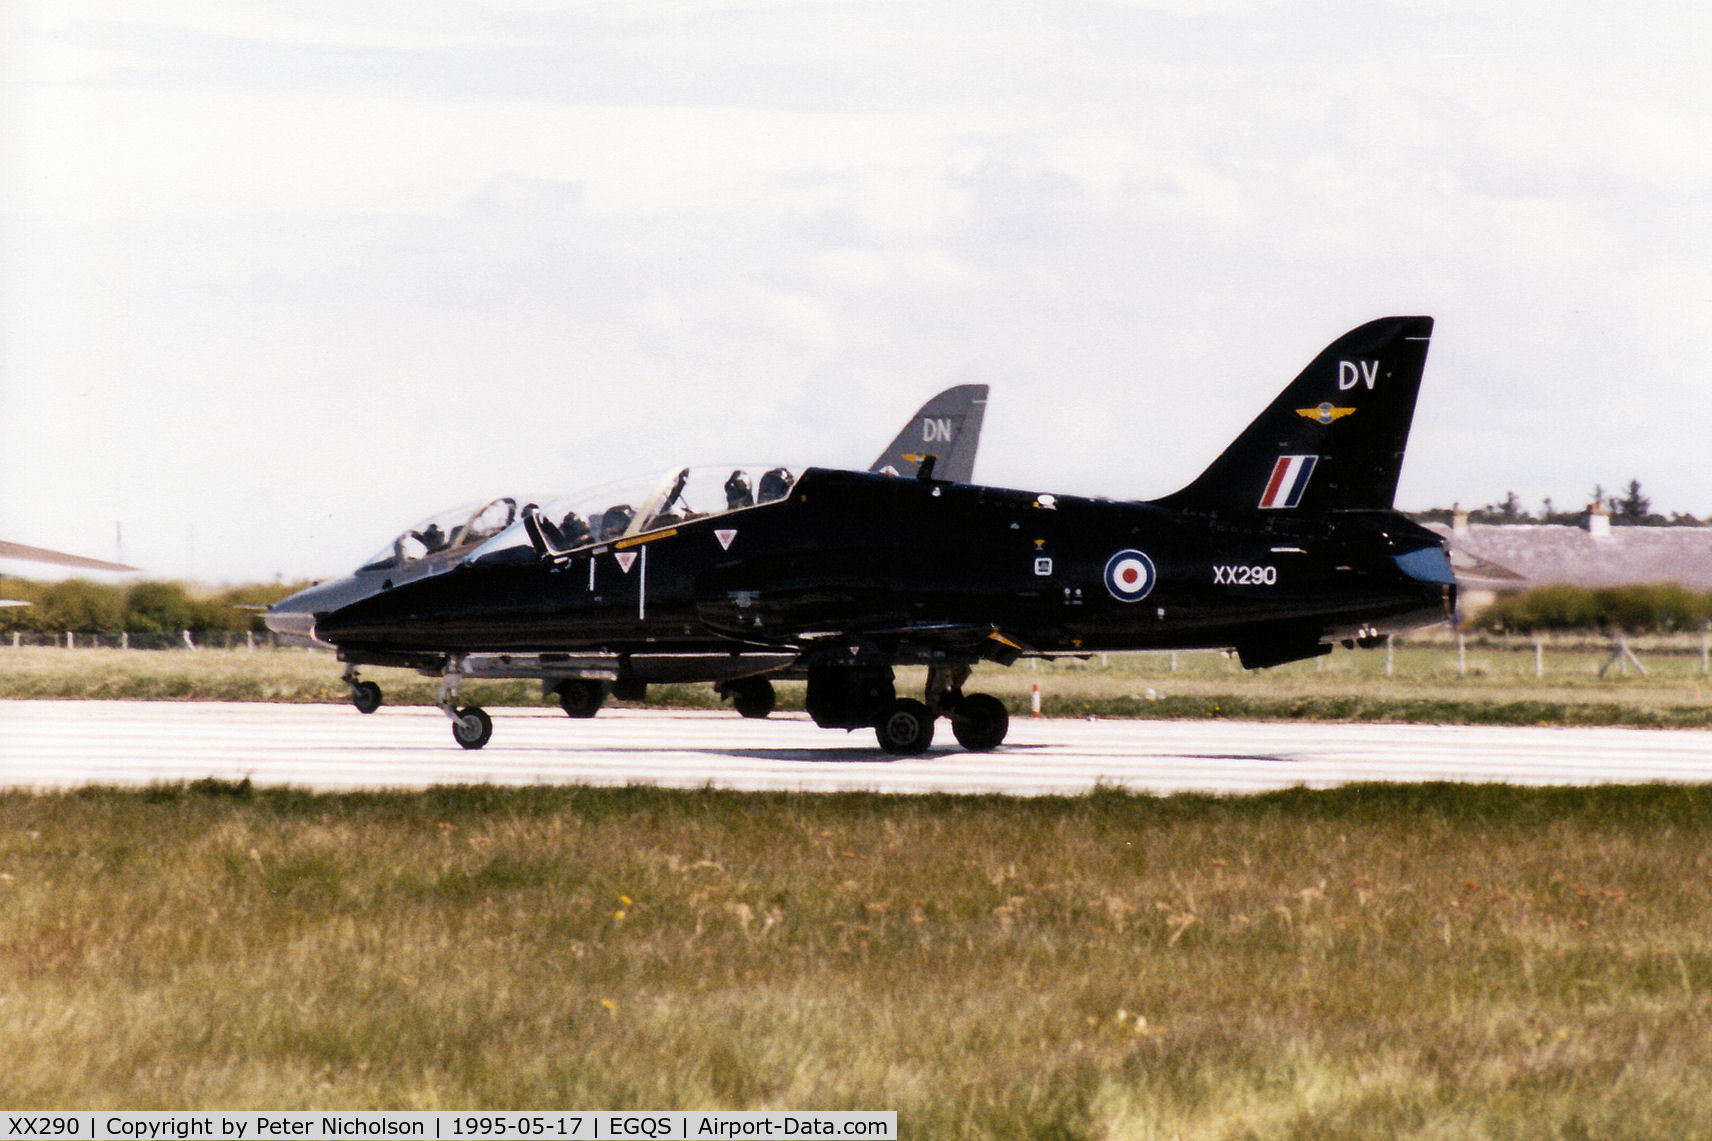 XX290, 1979 Hawker Siddeley Hawk T.1A C/N 116/312115, Hawk T.1A, callsign Eagle 4, of 208 [Reserve] Squadron at RAF Valley preparing for take-off on Runway 05 at RAF Lossiemouth in  the Summer of 1995.